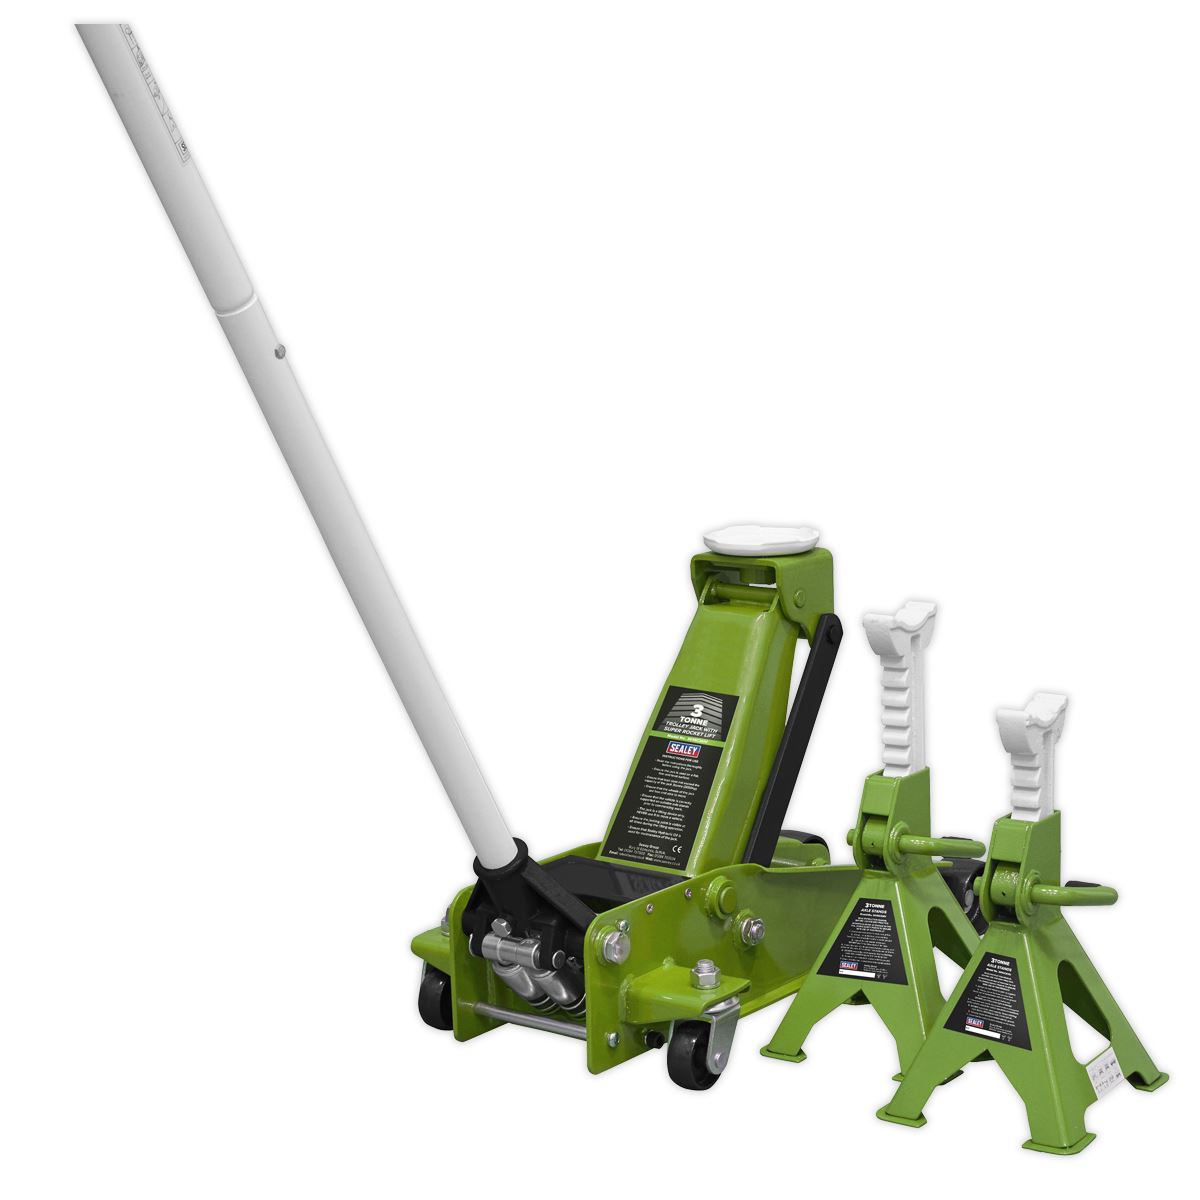 Sealey Trolley Jack with Super Rocket Lift 3 Tonne & Axle Stands (Pair) 3 Tonne Capacity per Stand - Green